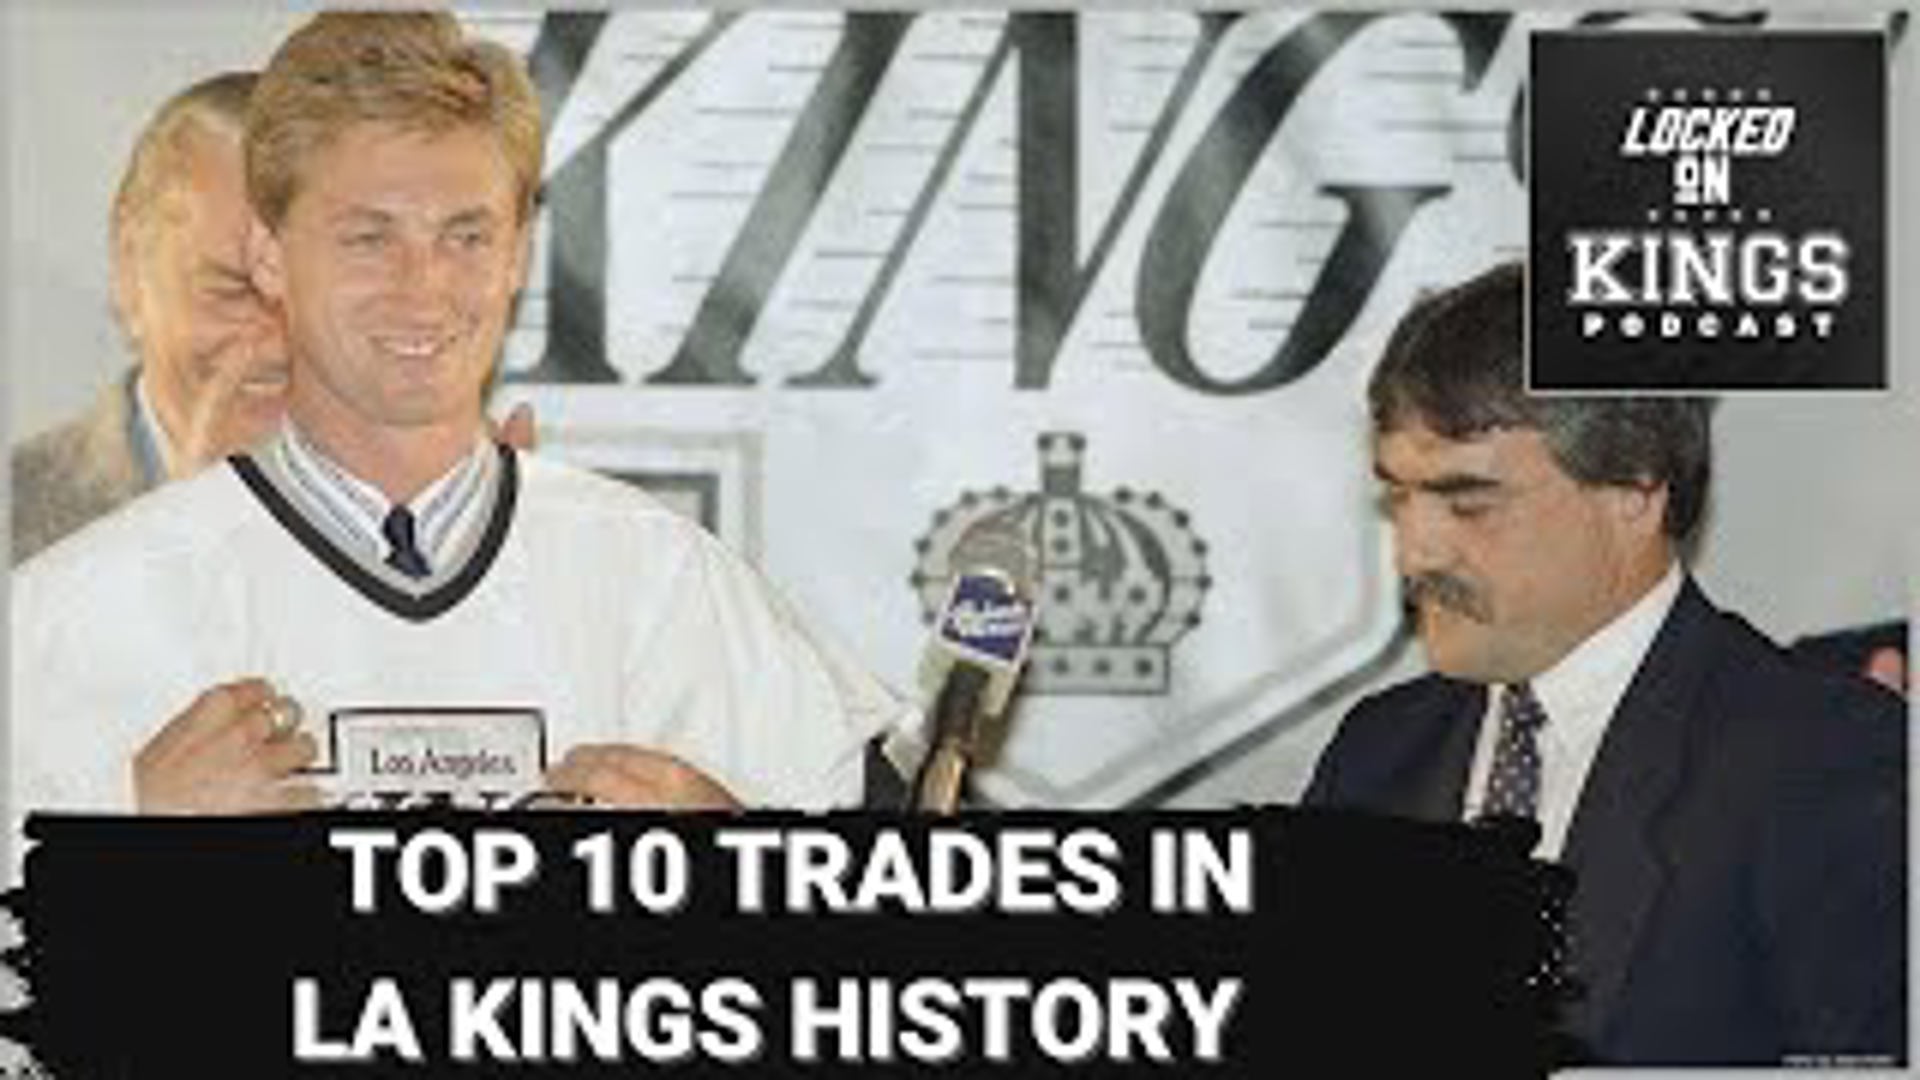 We rank the Top 10 best trades in Kings history on this special 4th of July edition of Locked on LA Kings.